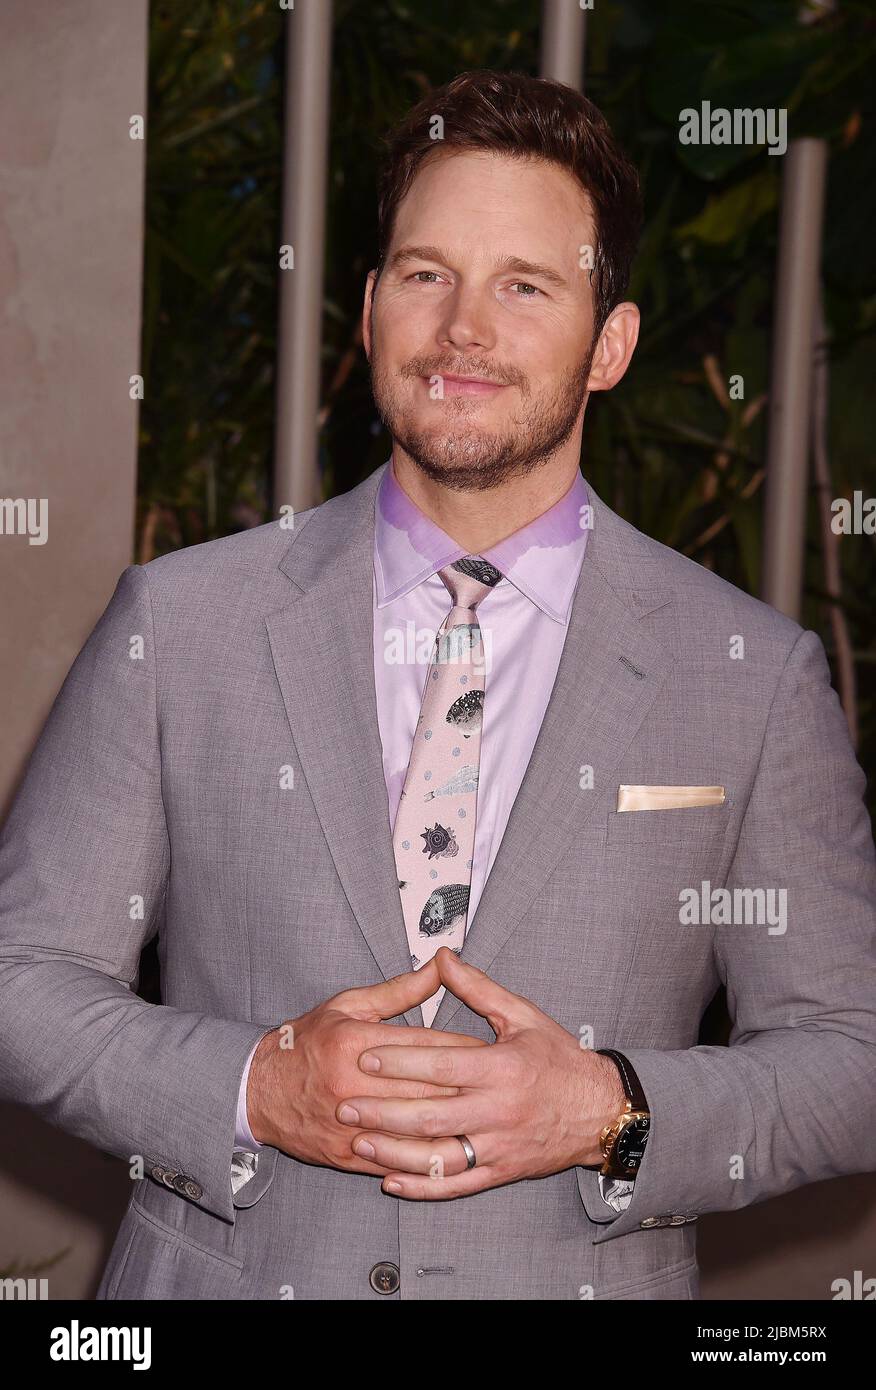 HOLLYWOOD, CA - JUNE 06: Chris Pratt attends the Los Angeles premiere of Universal Pictures' 'Jurassic World Dominion' at the TCL Chinese Theatre on J Stock Photo